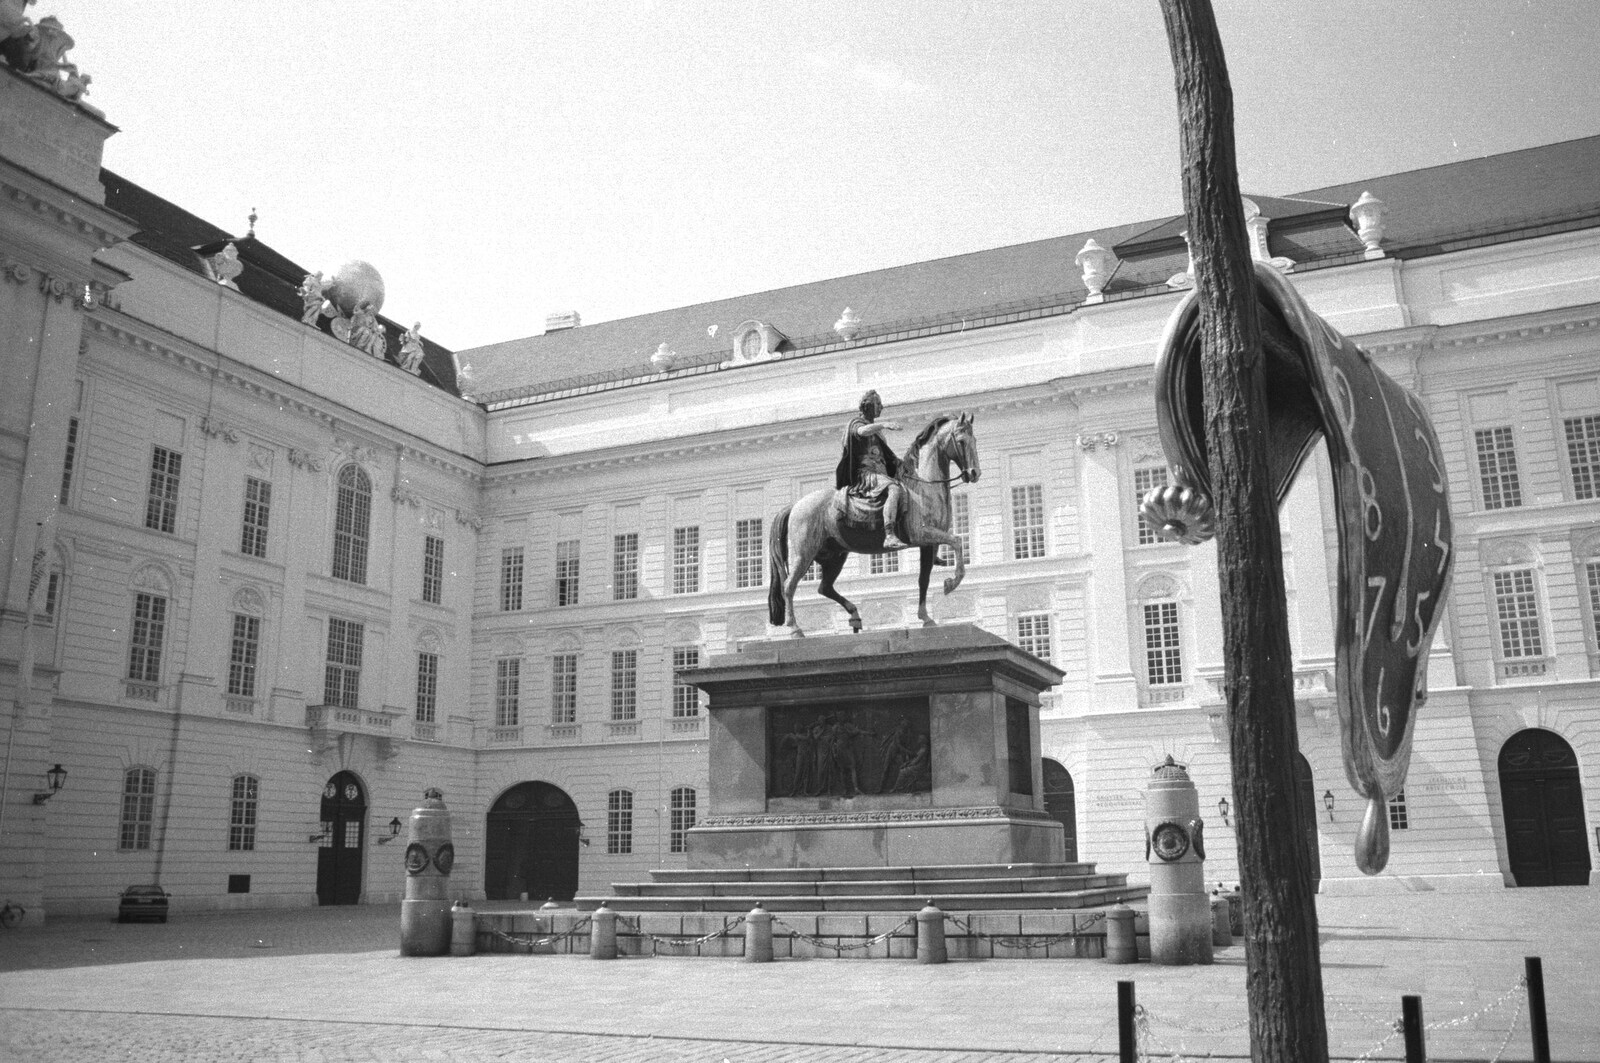 A Dali-esque molten watch outside Hofburg Palace from A Postcard From Hofburg Palace, Vienna, Austria - 18th April 2000